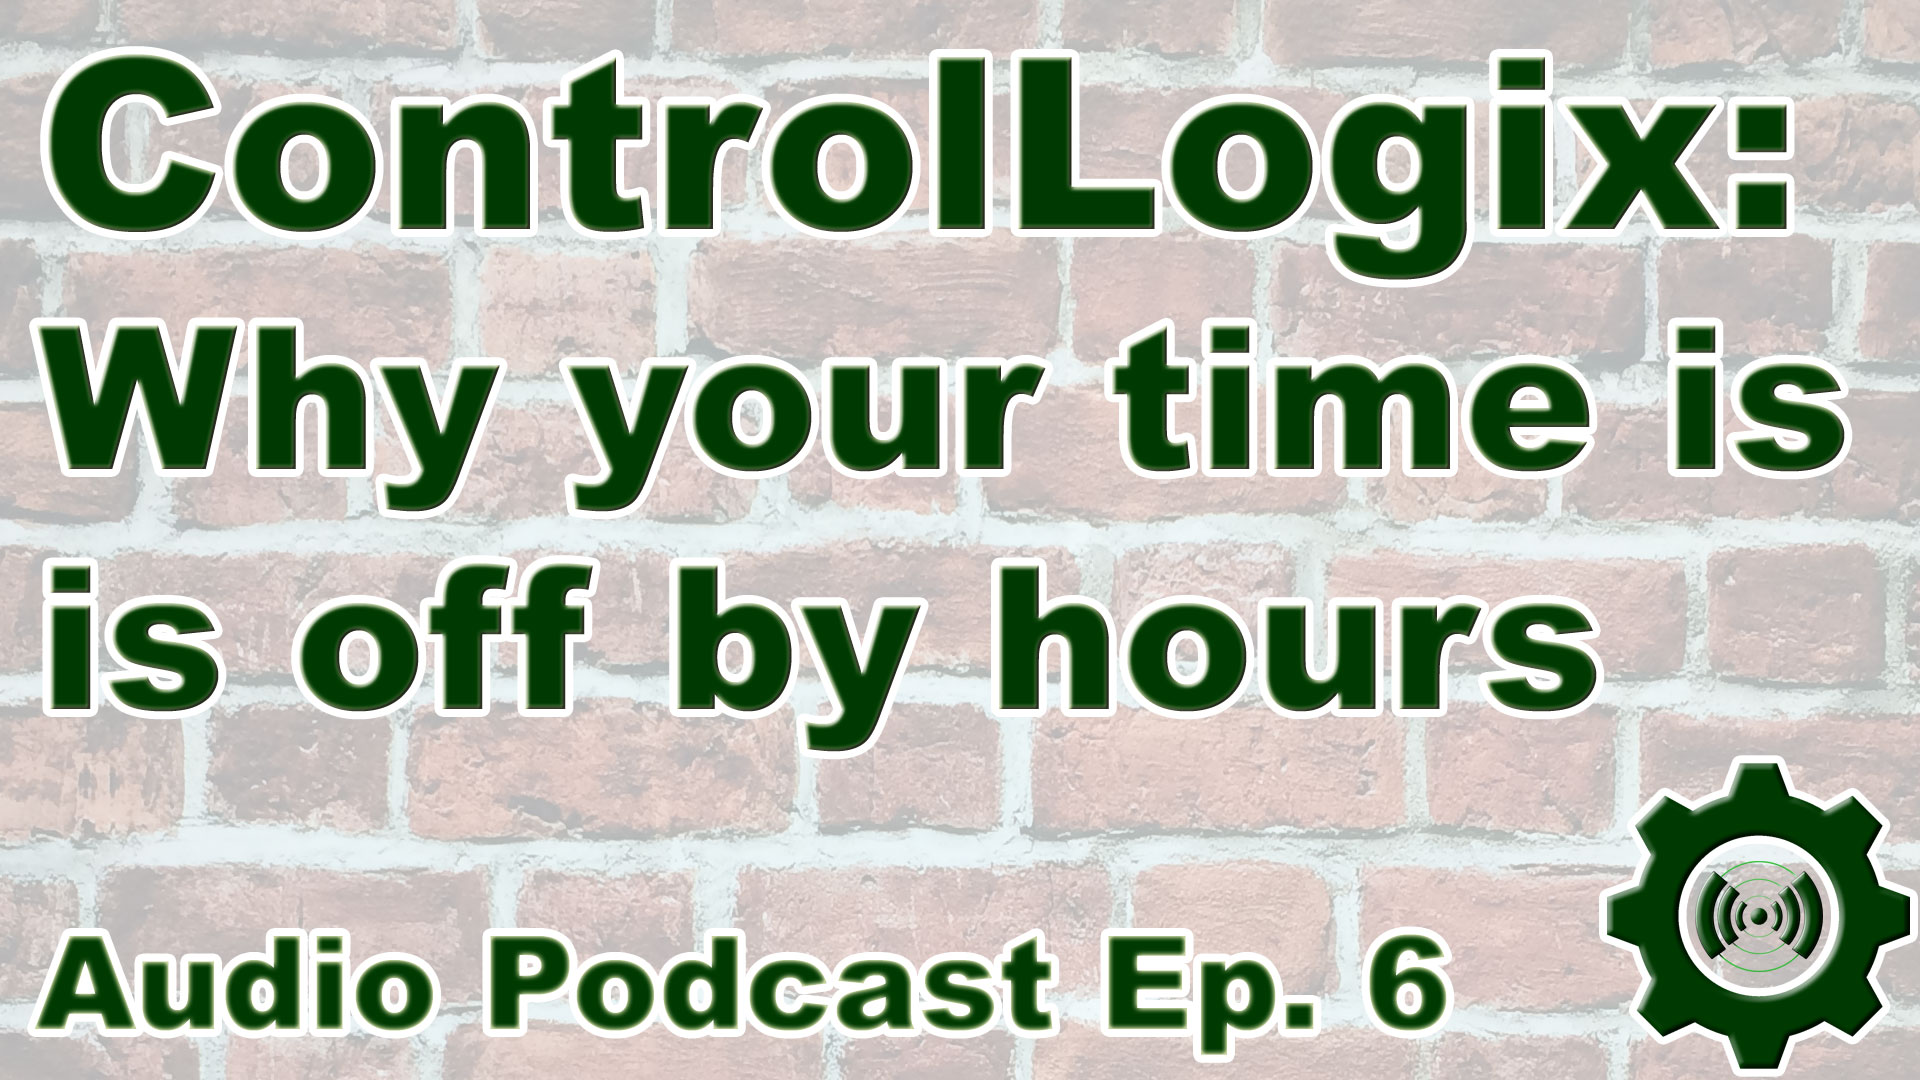 ControlLogix, CompactLogix - Why your Controller's Real Time Clock (DateTime) may be a few hours off (P6)